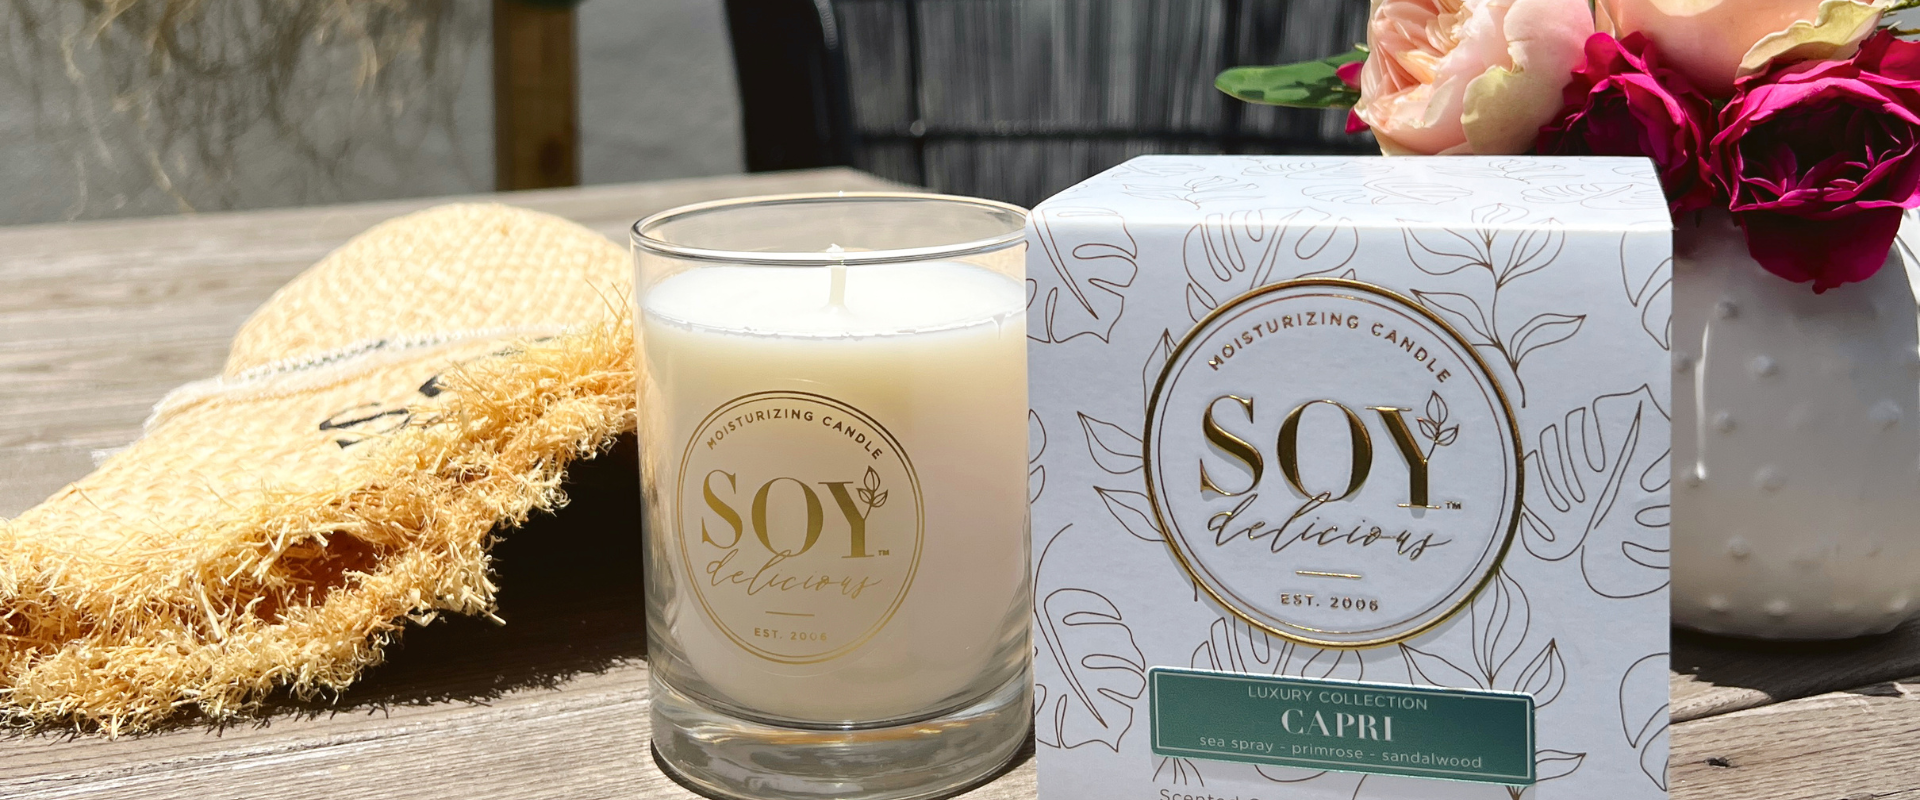 Soy Delicious’ Top 3 Summer Candle Scents